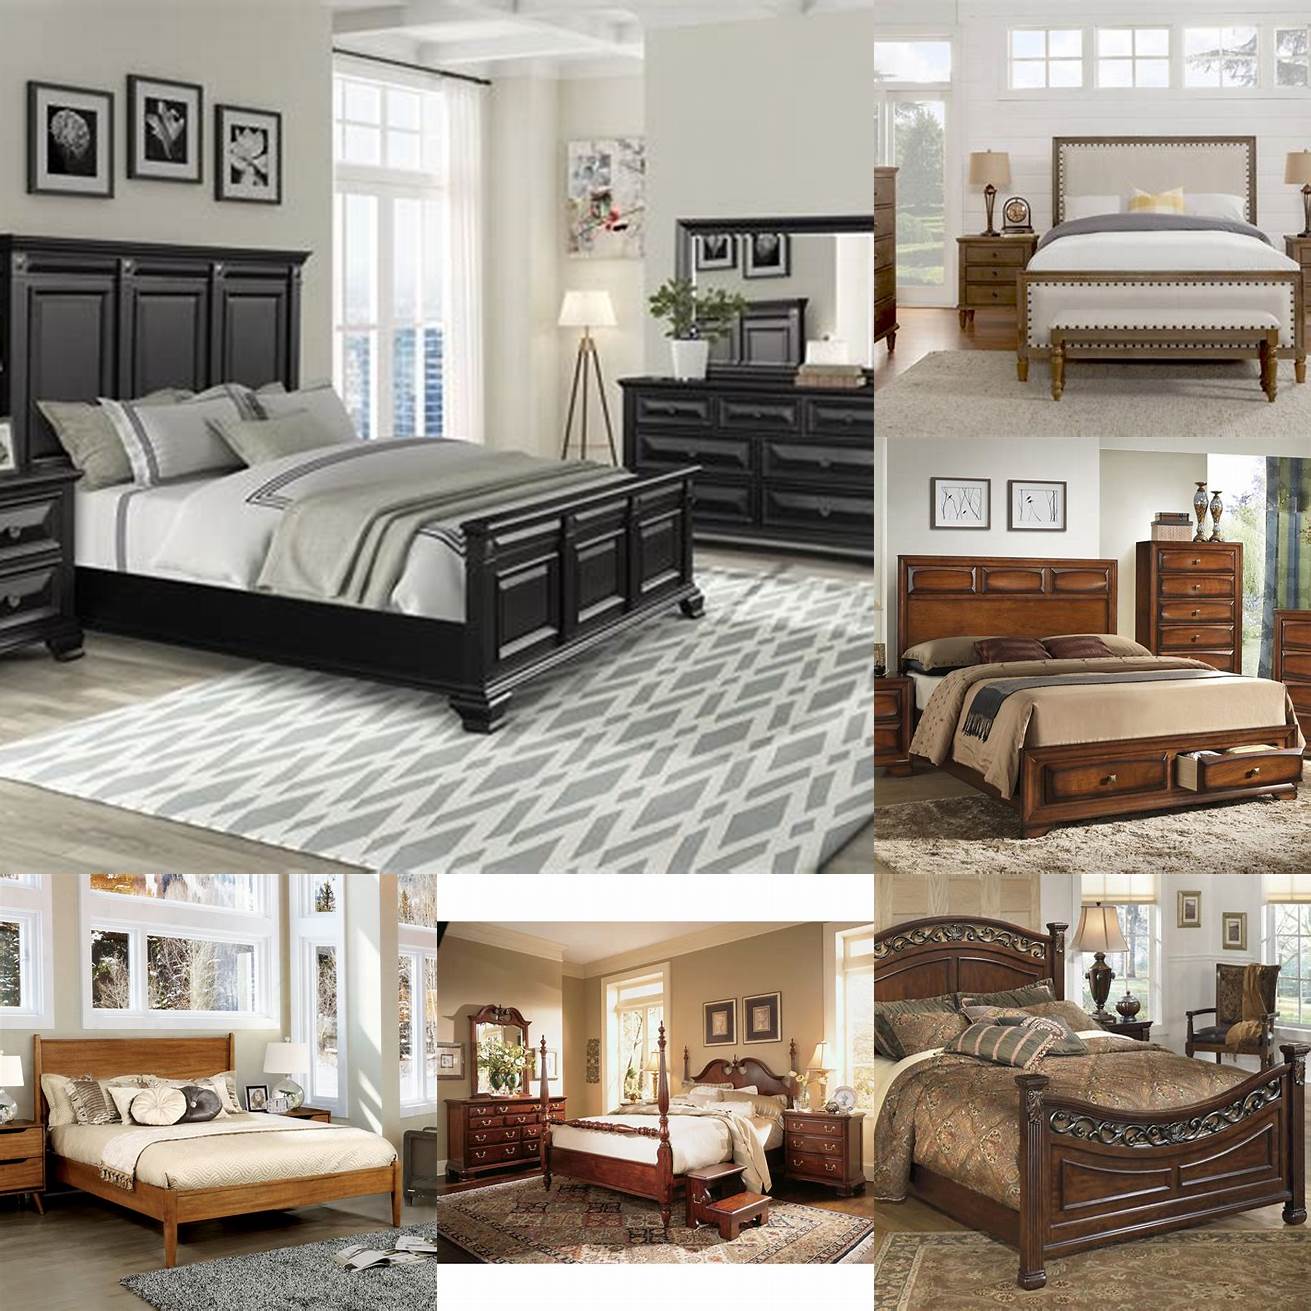 1 A traditional Queen Bed Set with a wooden bed frame and muted colors